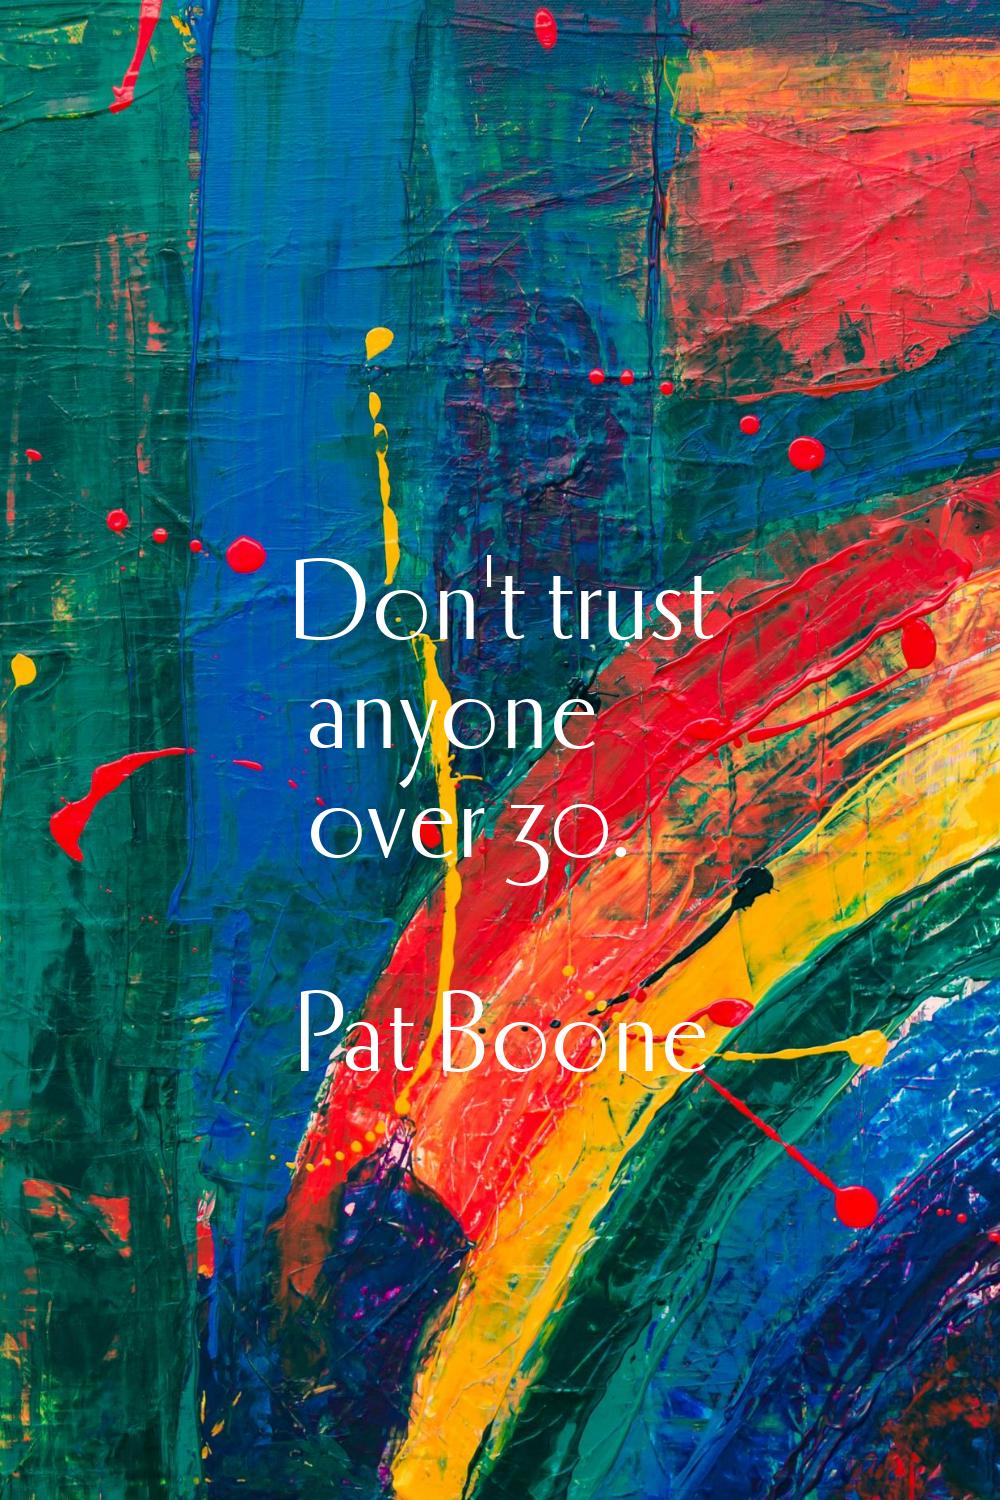 Don't trust anyone over 30.